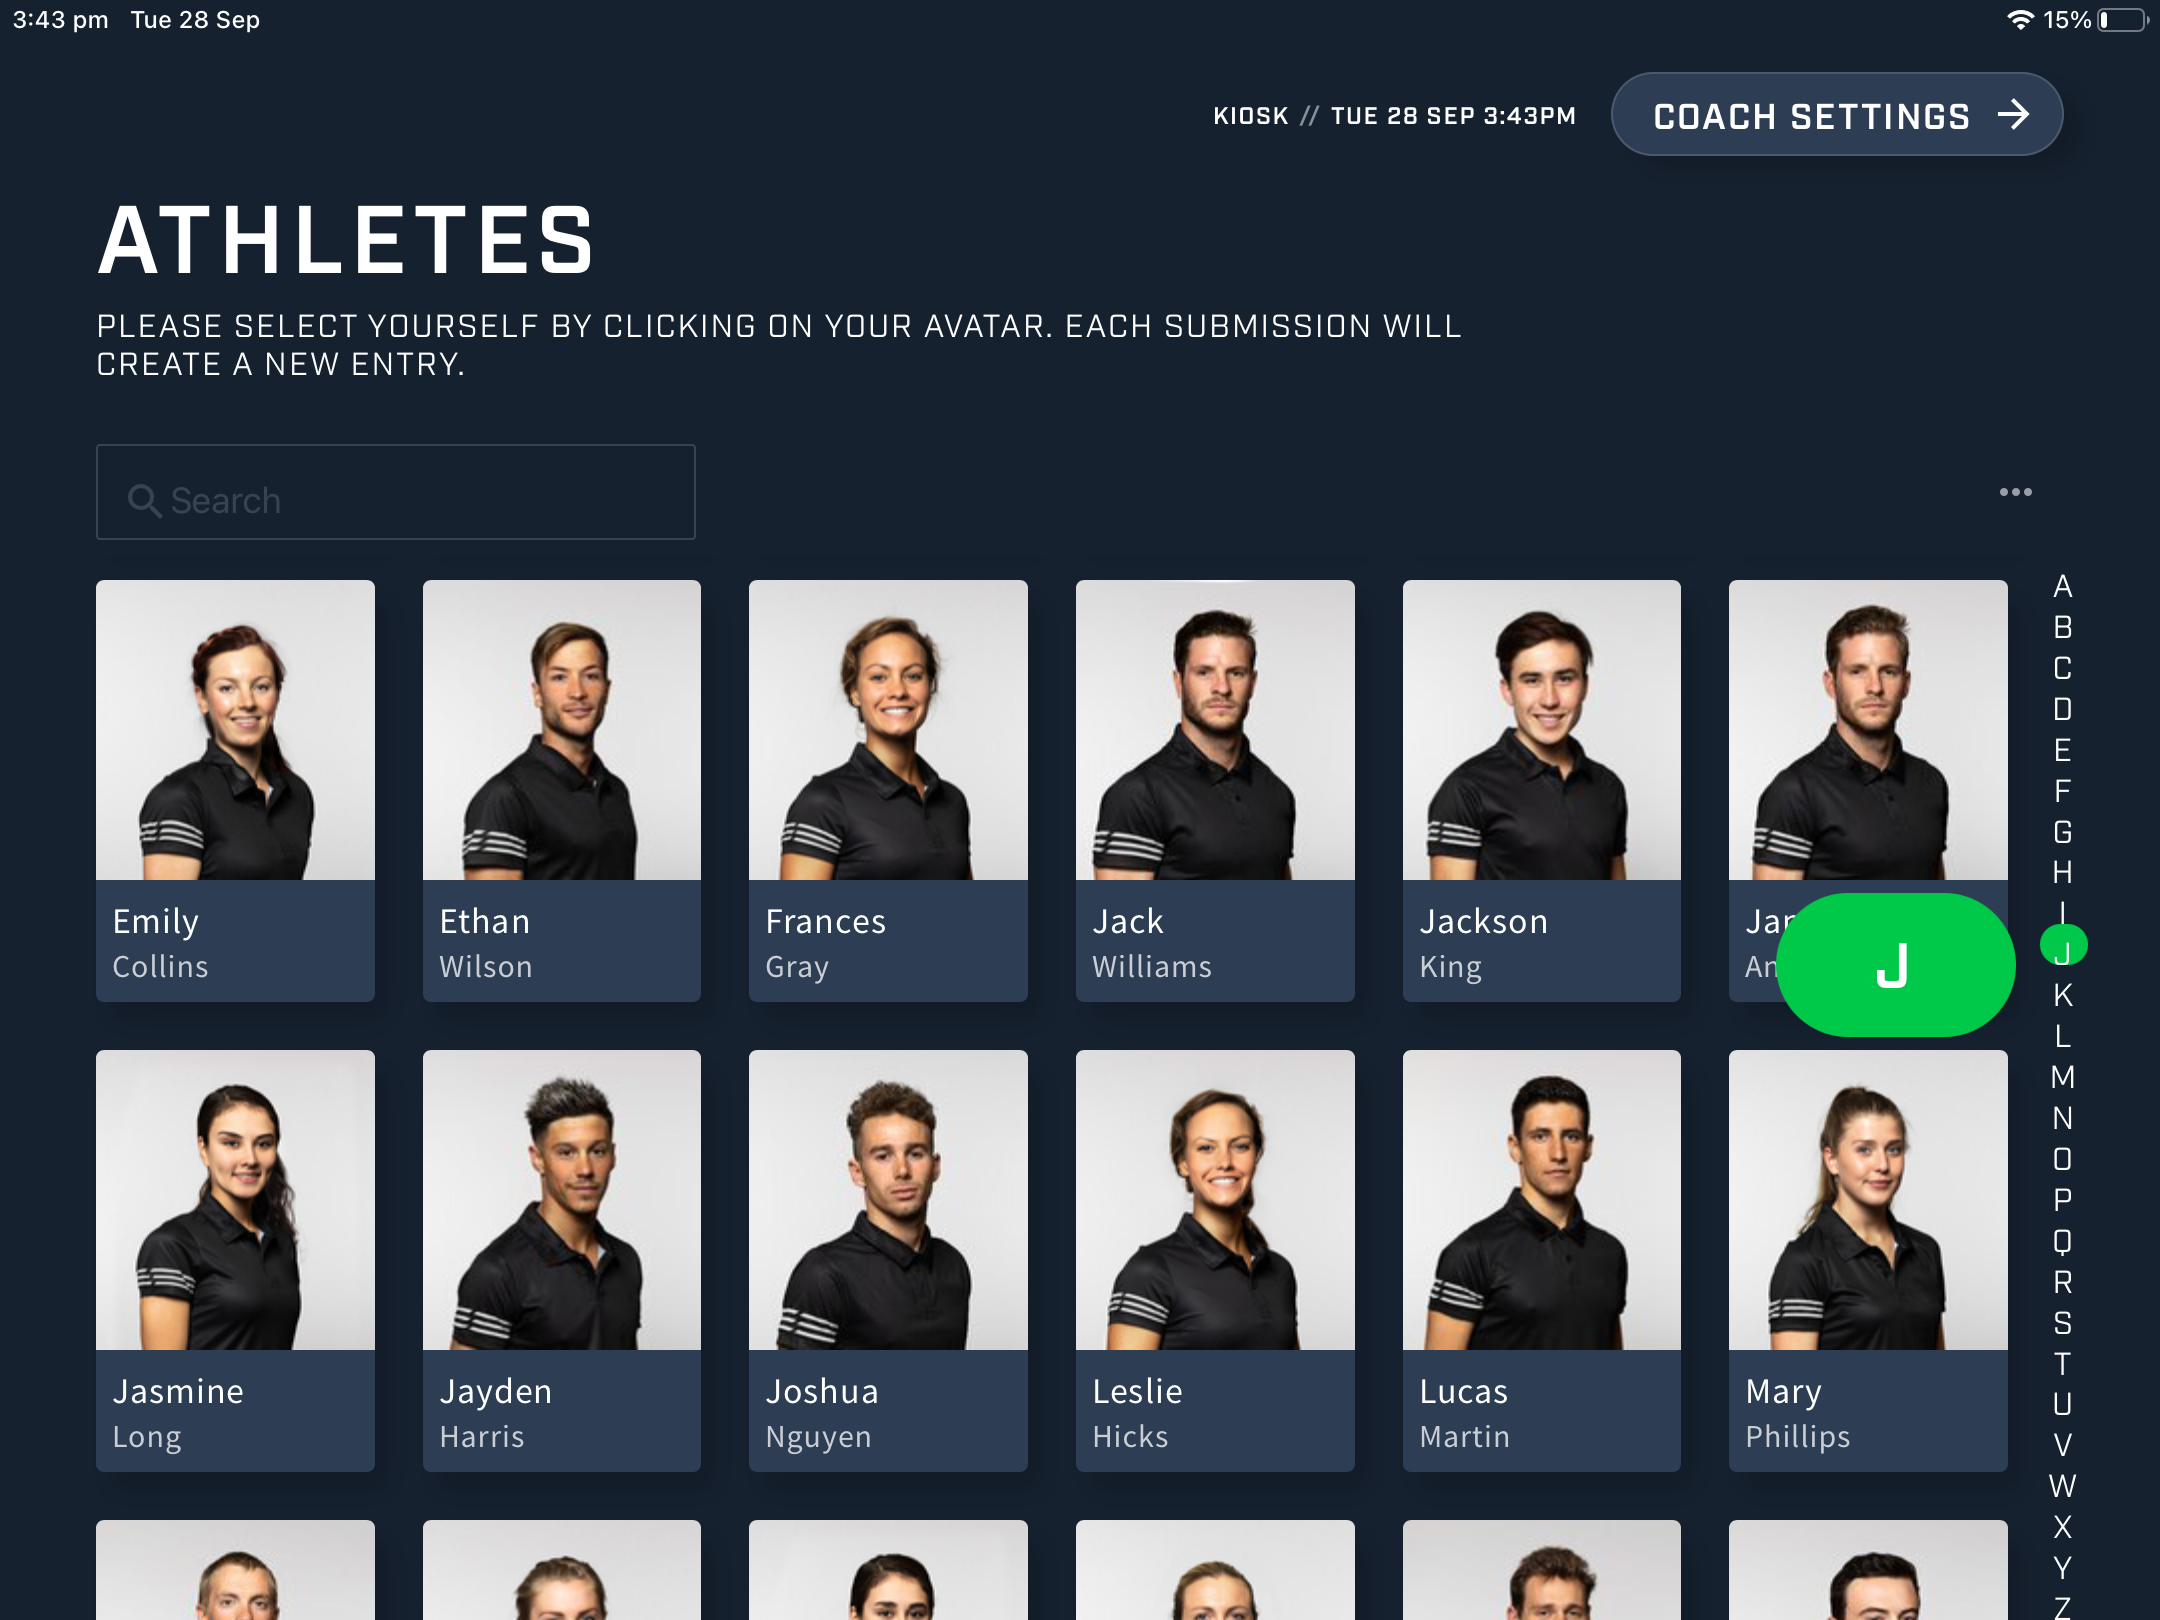 A screenshot of the athlete selection screen on the Kiosk app